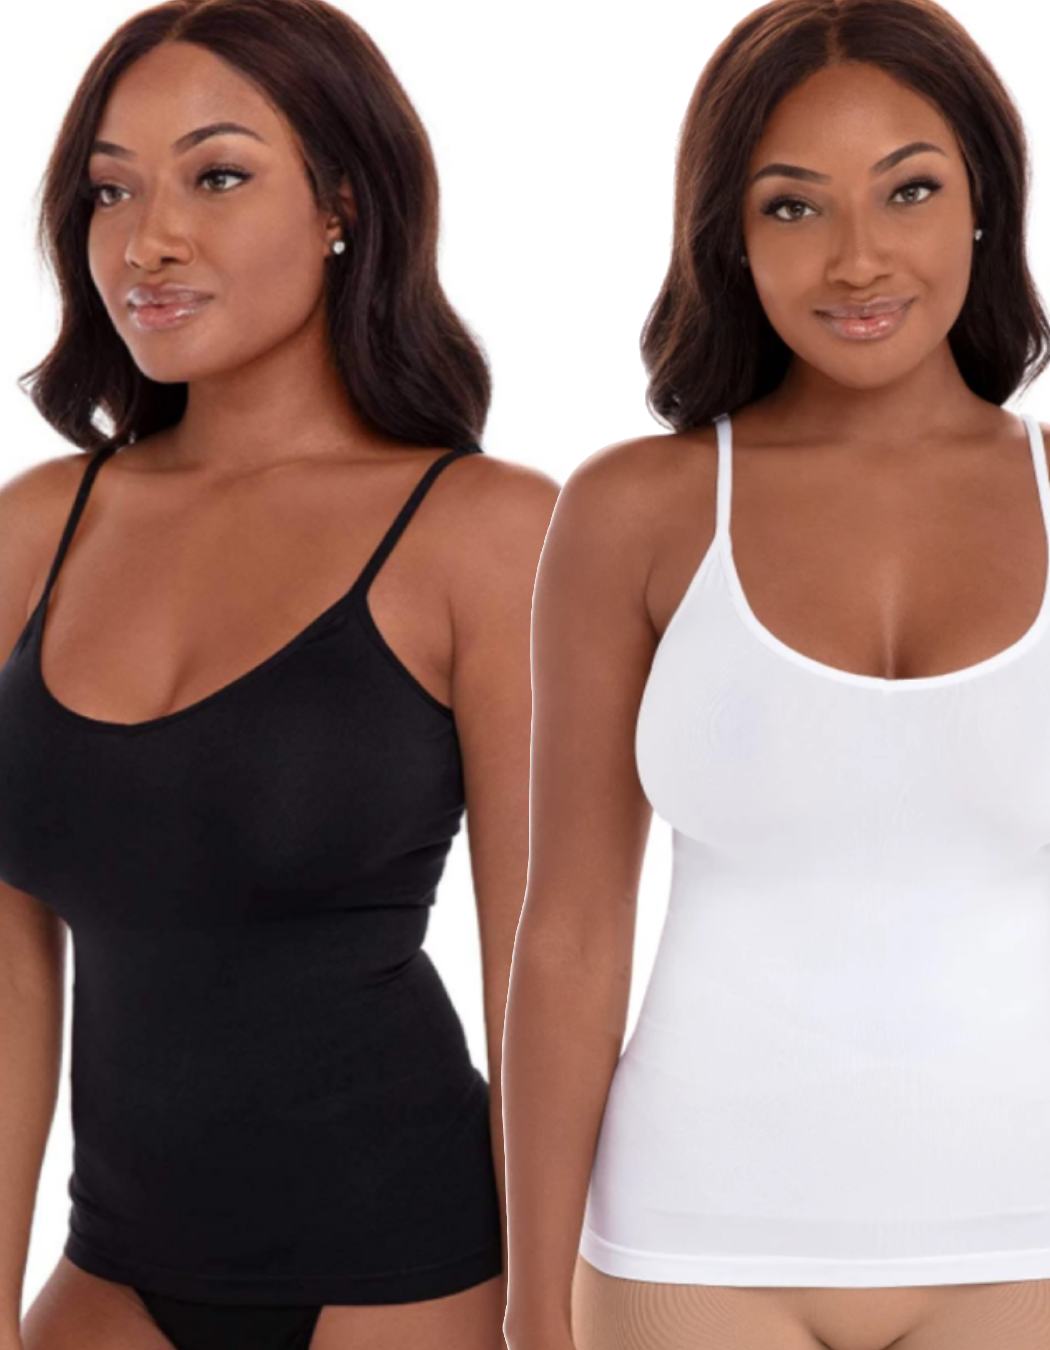 Ribbed Seamless 2 Pack Shaper Camisole, Black/White